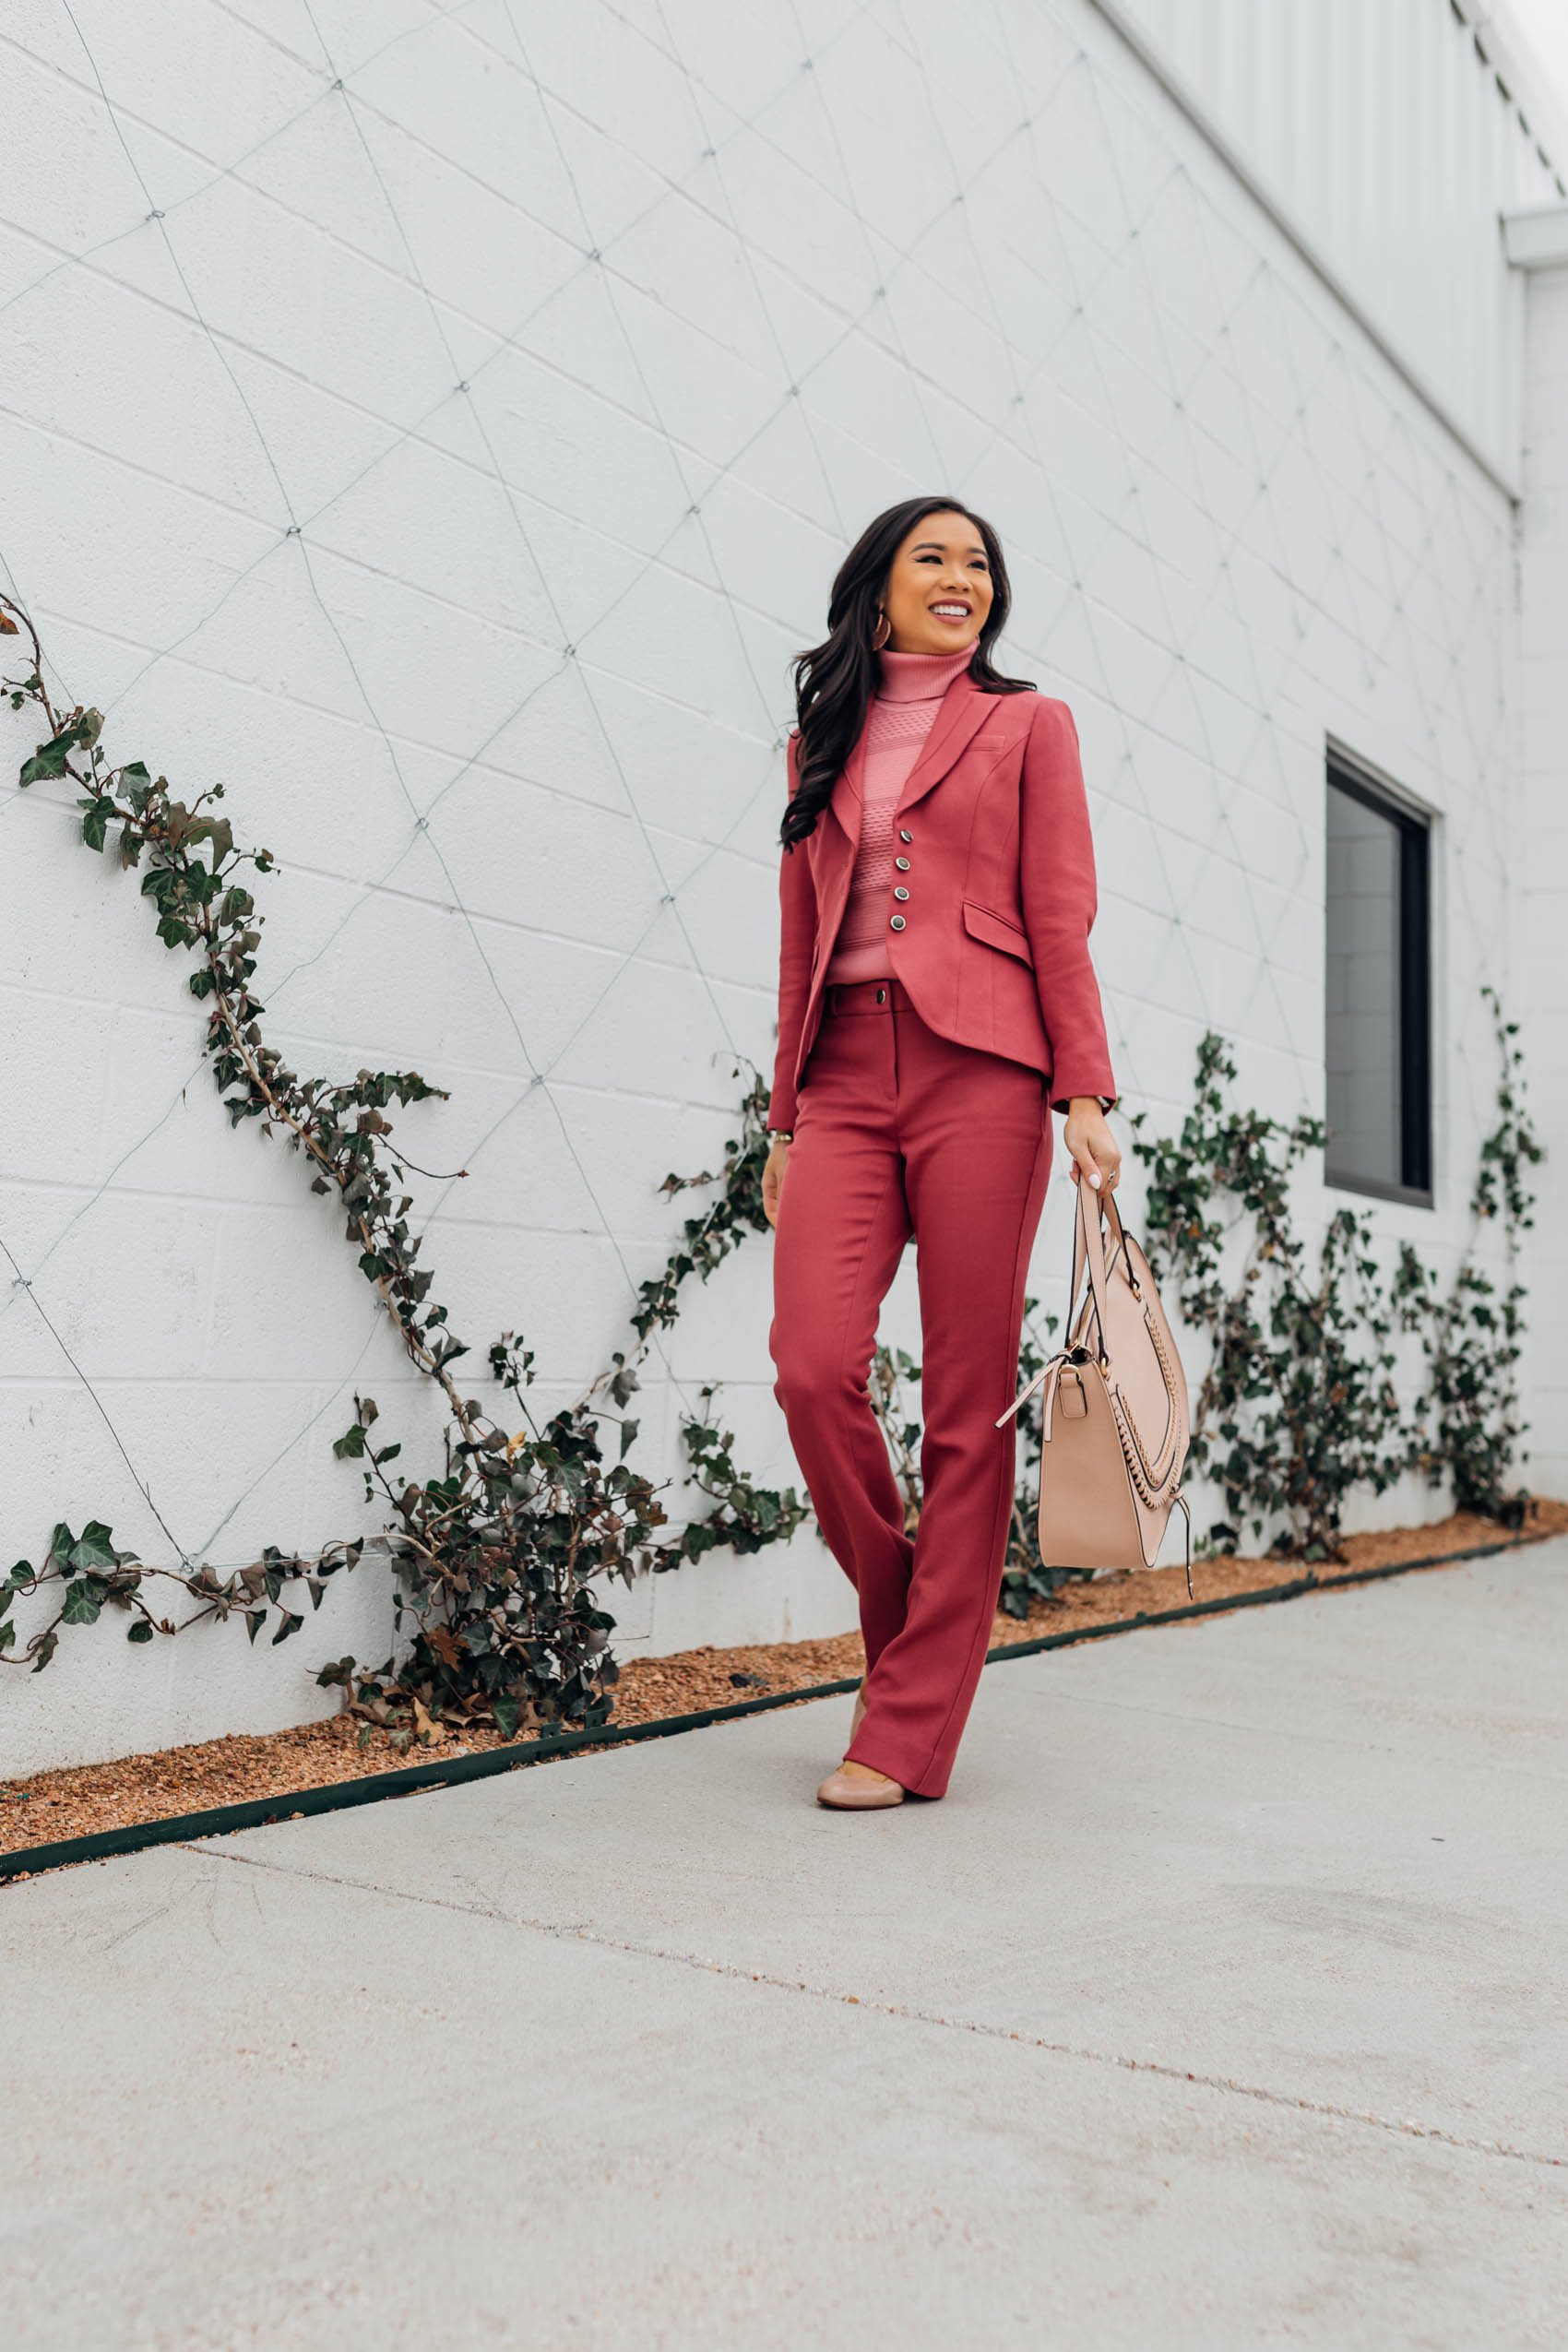 Blogger Hoang-Kim shares a colorful workwear style from White House Black Market